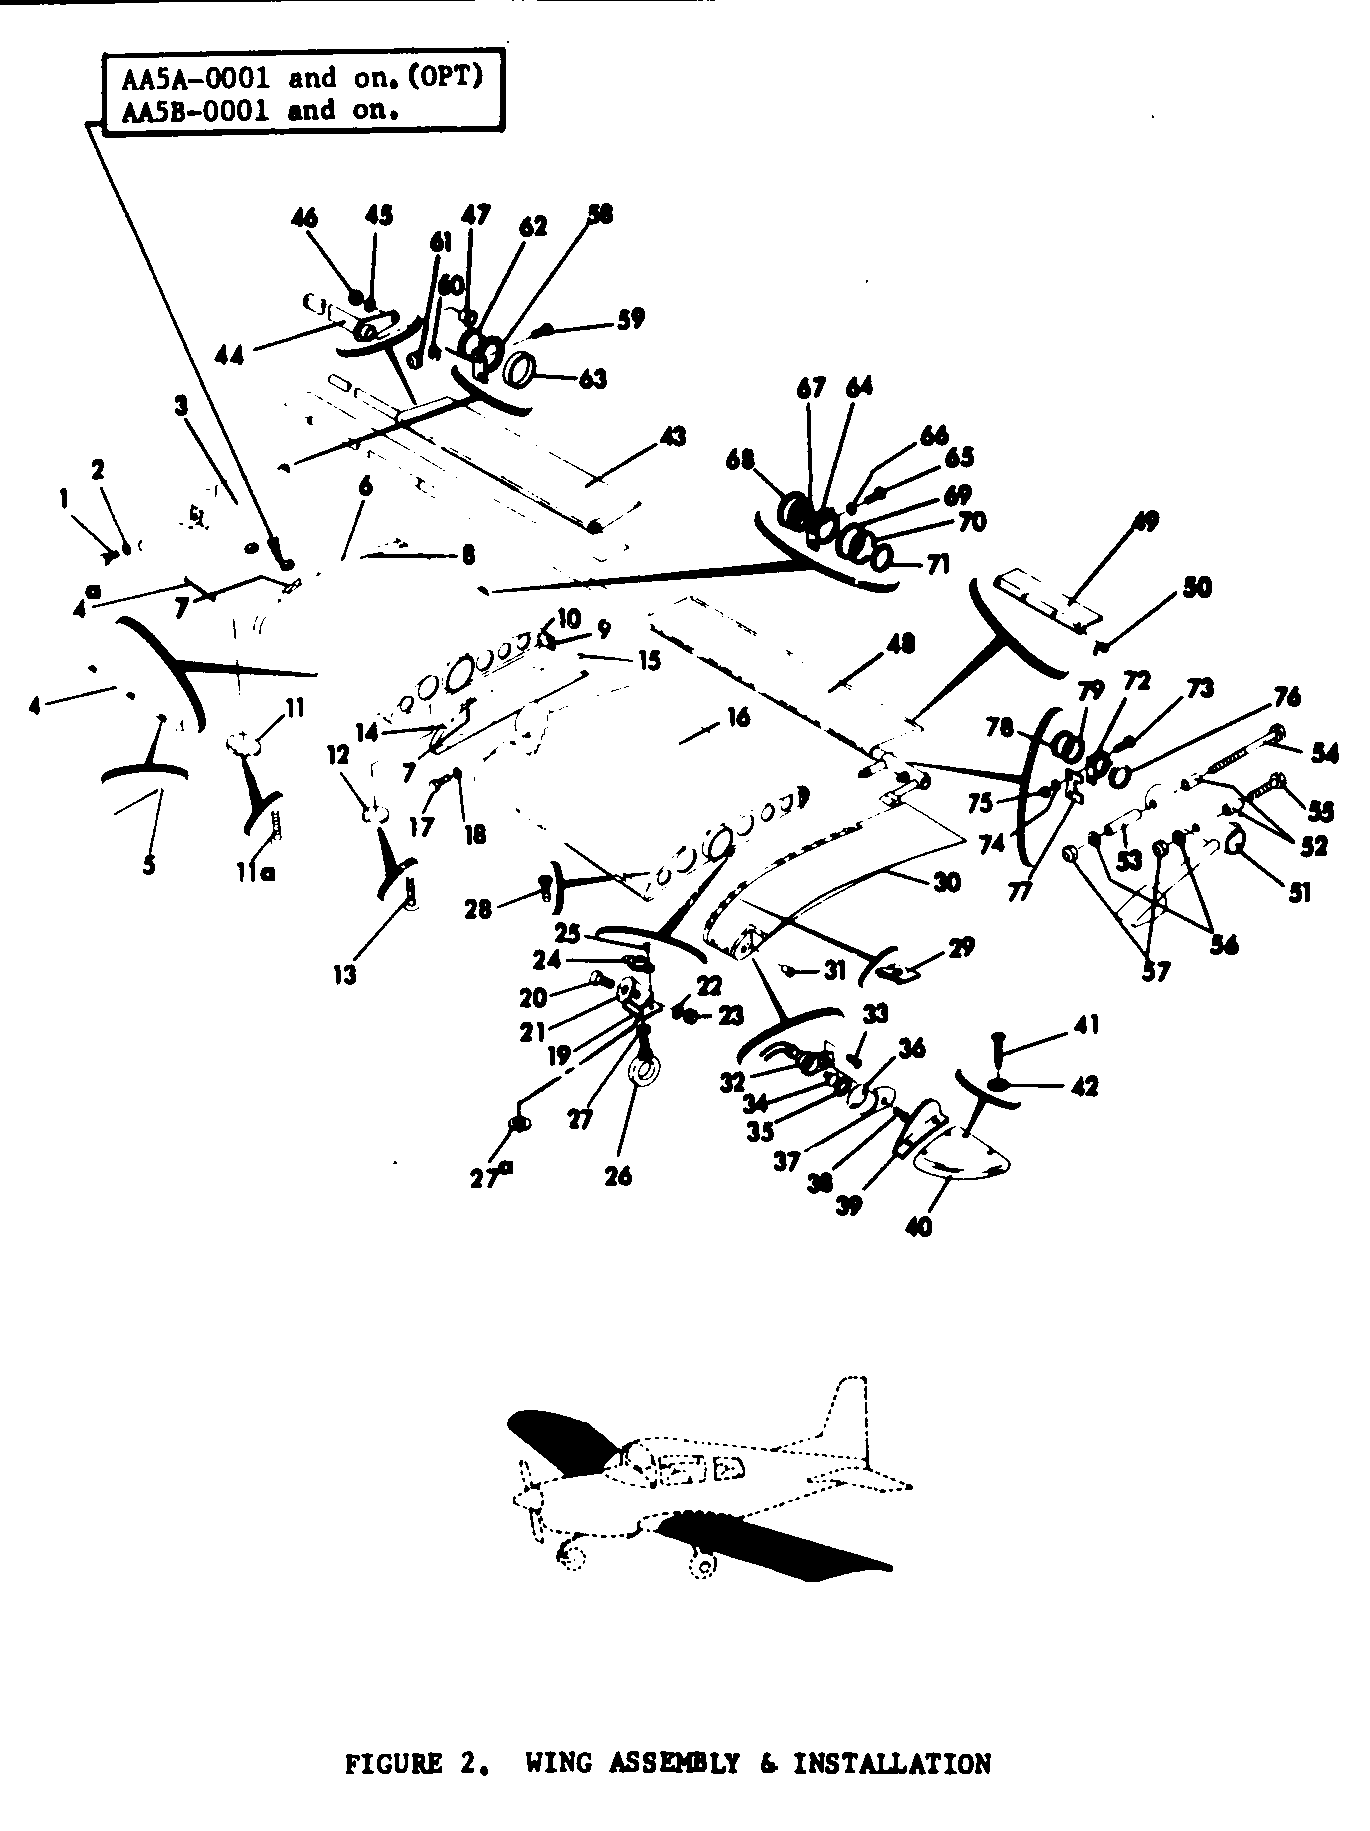 Figure 2 AA5A OPT AA5B 0001 and on Wing Assembly